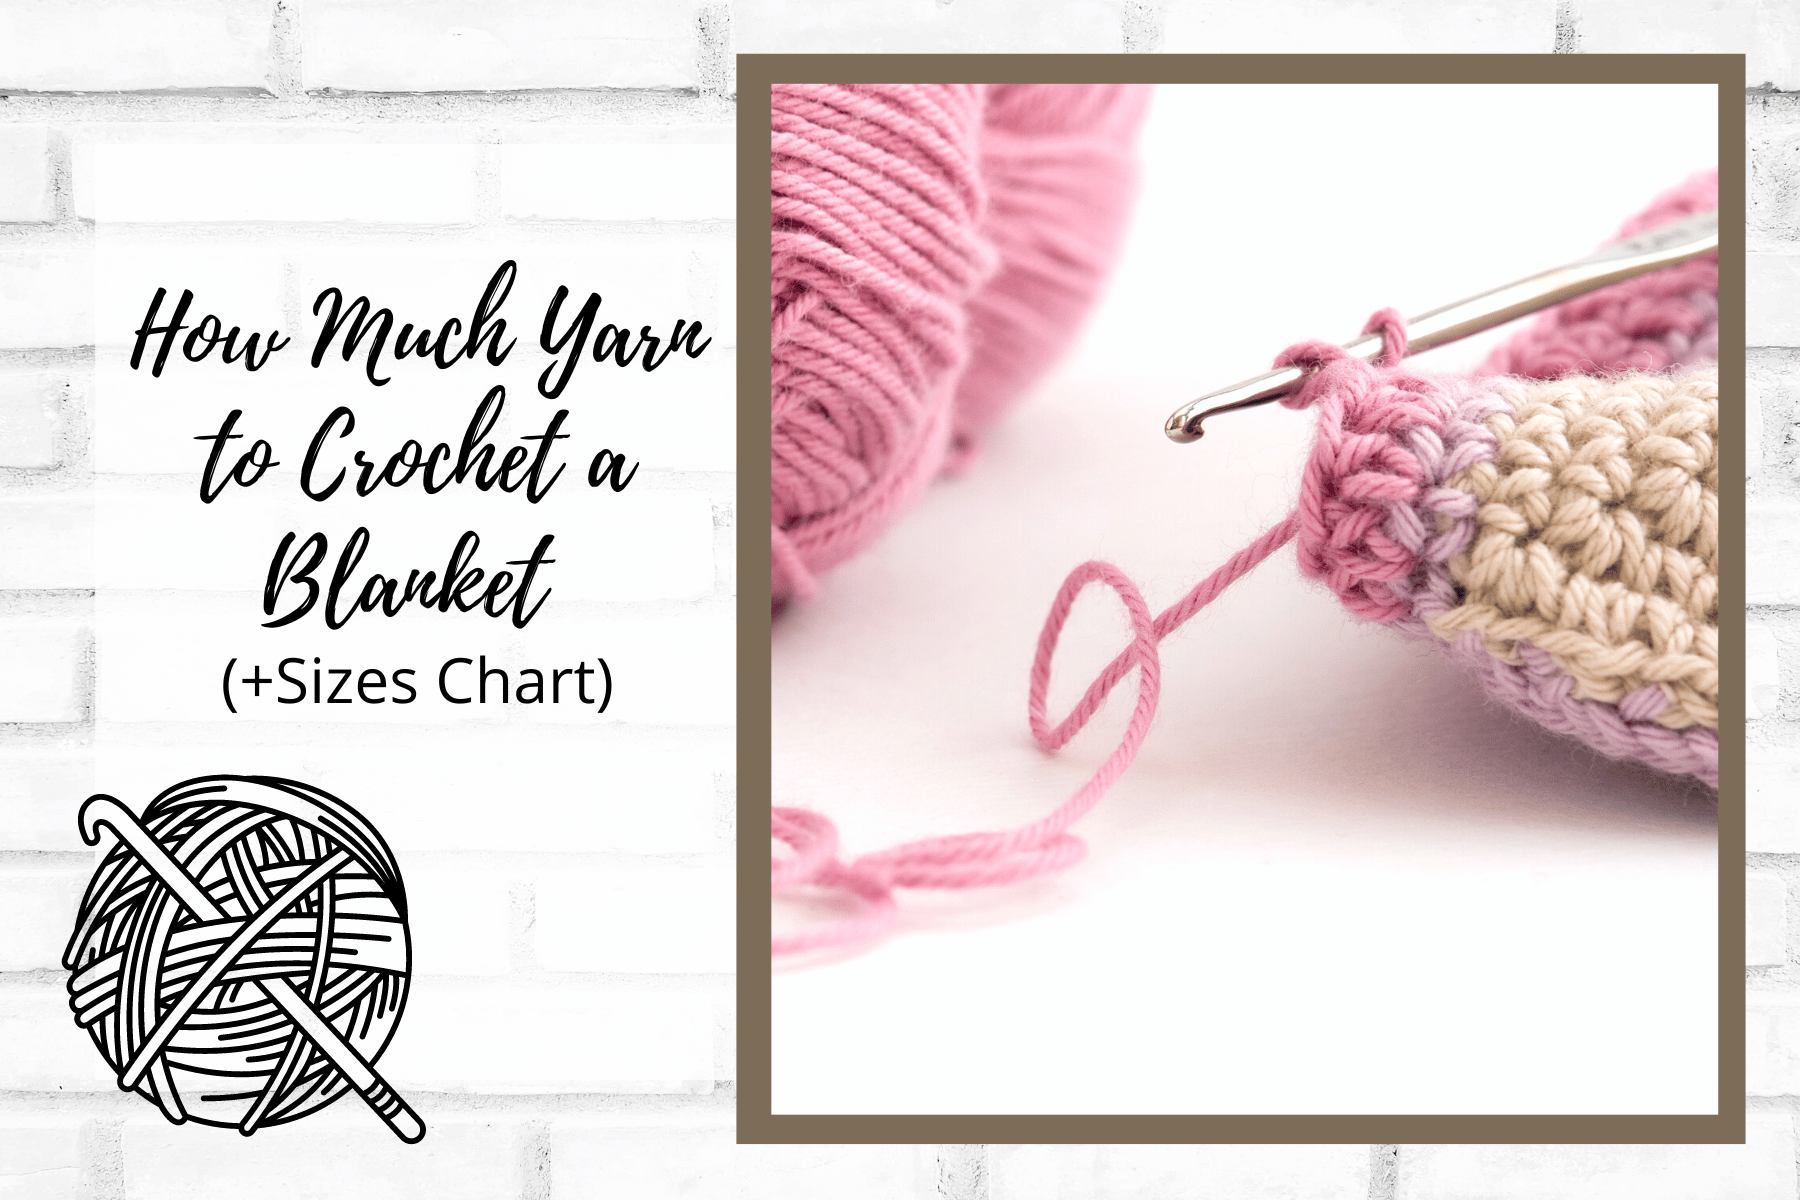 How Much Yarn to Crochet A Project? (Size Chart Included) – Mary Maxim